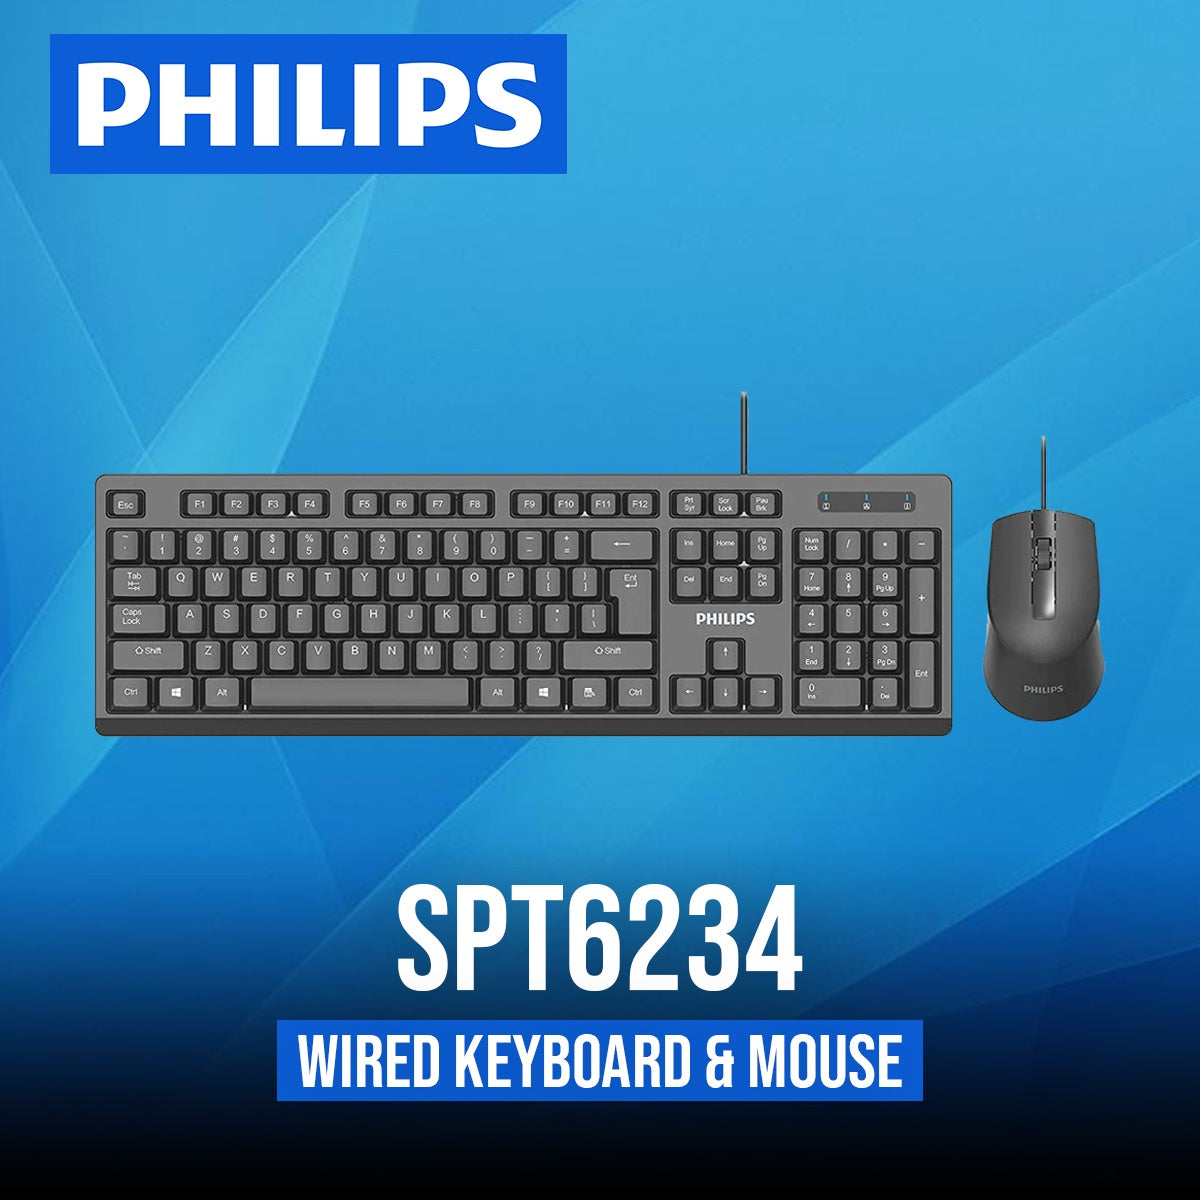 Philips SPT6234 Combo Wired keyboard mouse